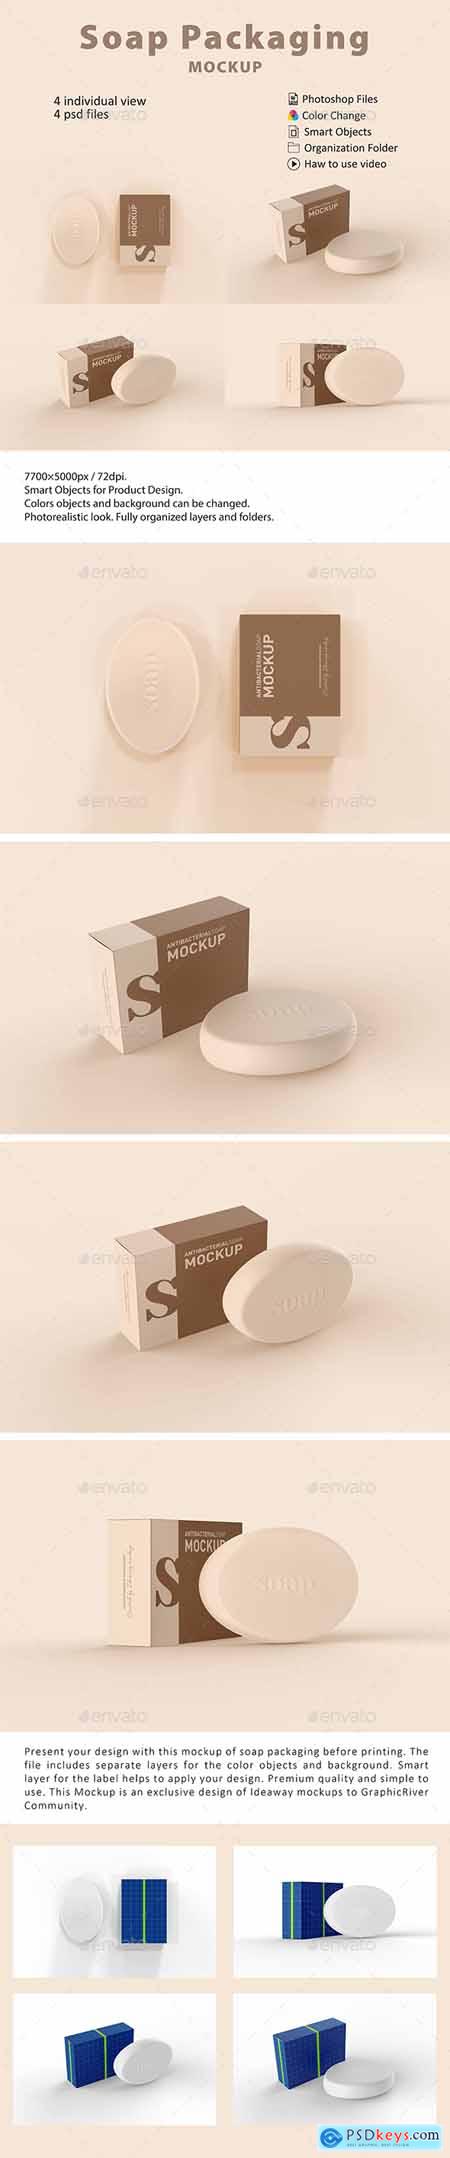 Download Graphicriver Soap Packaging Mockup 23804136